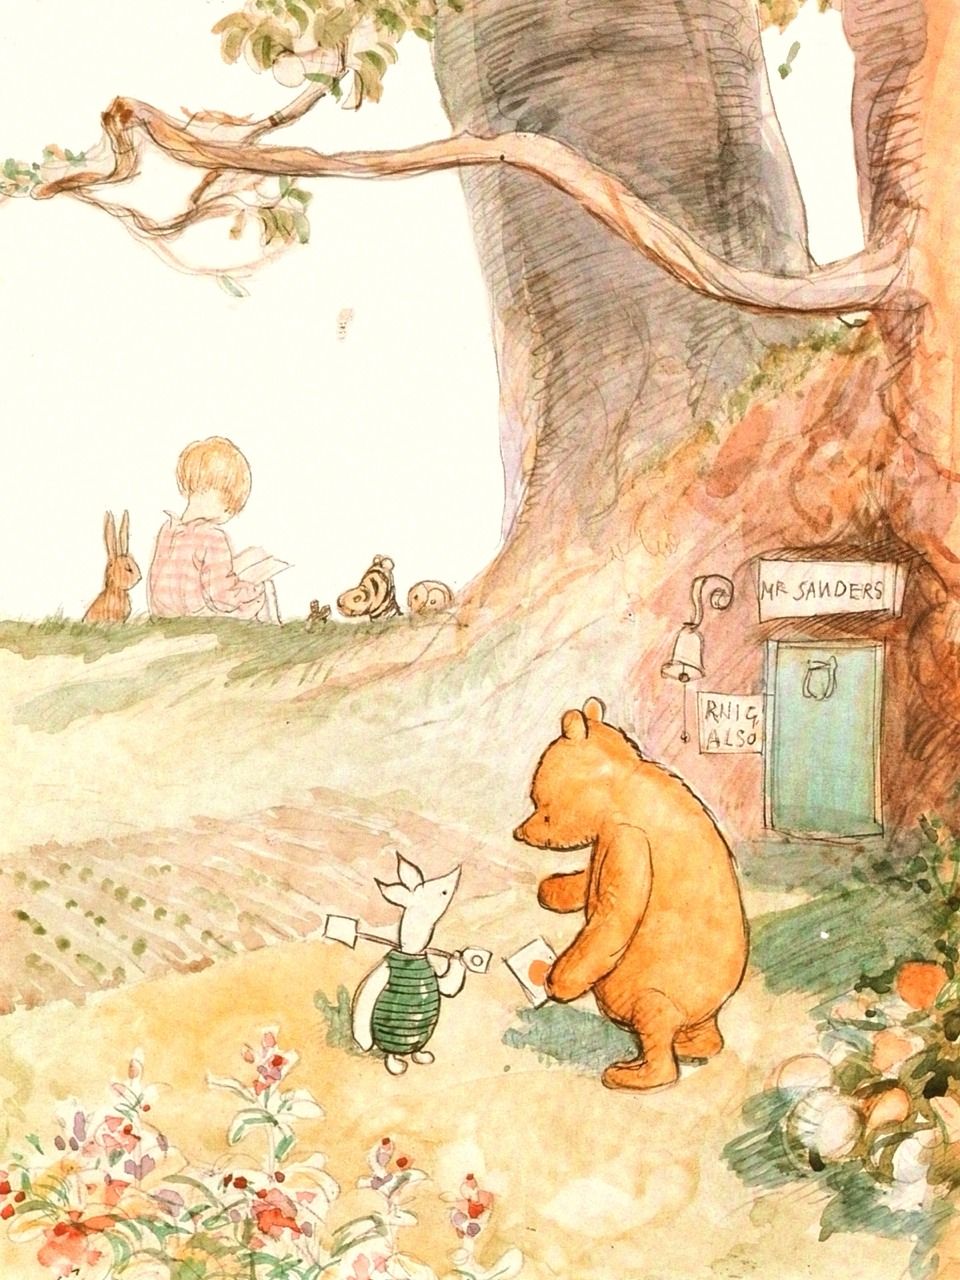 pooh-and-piglet